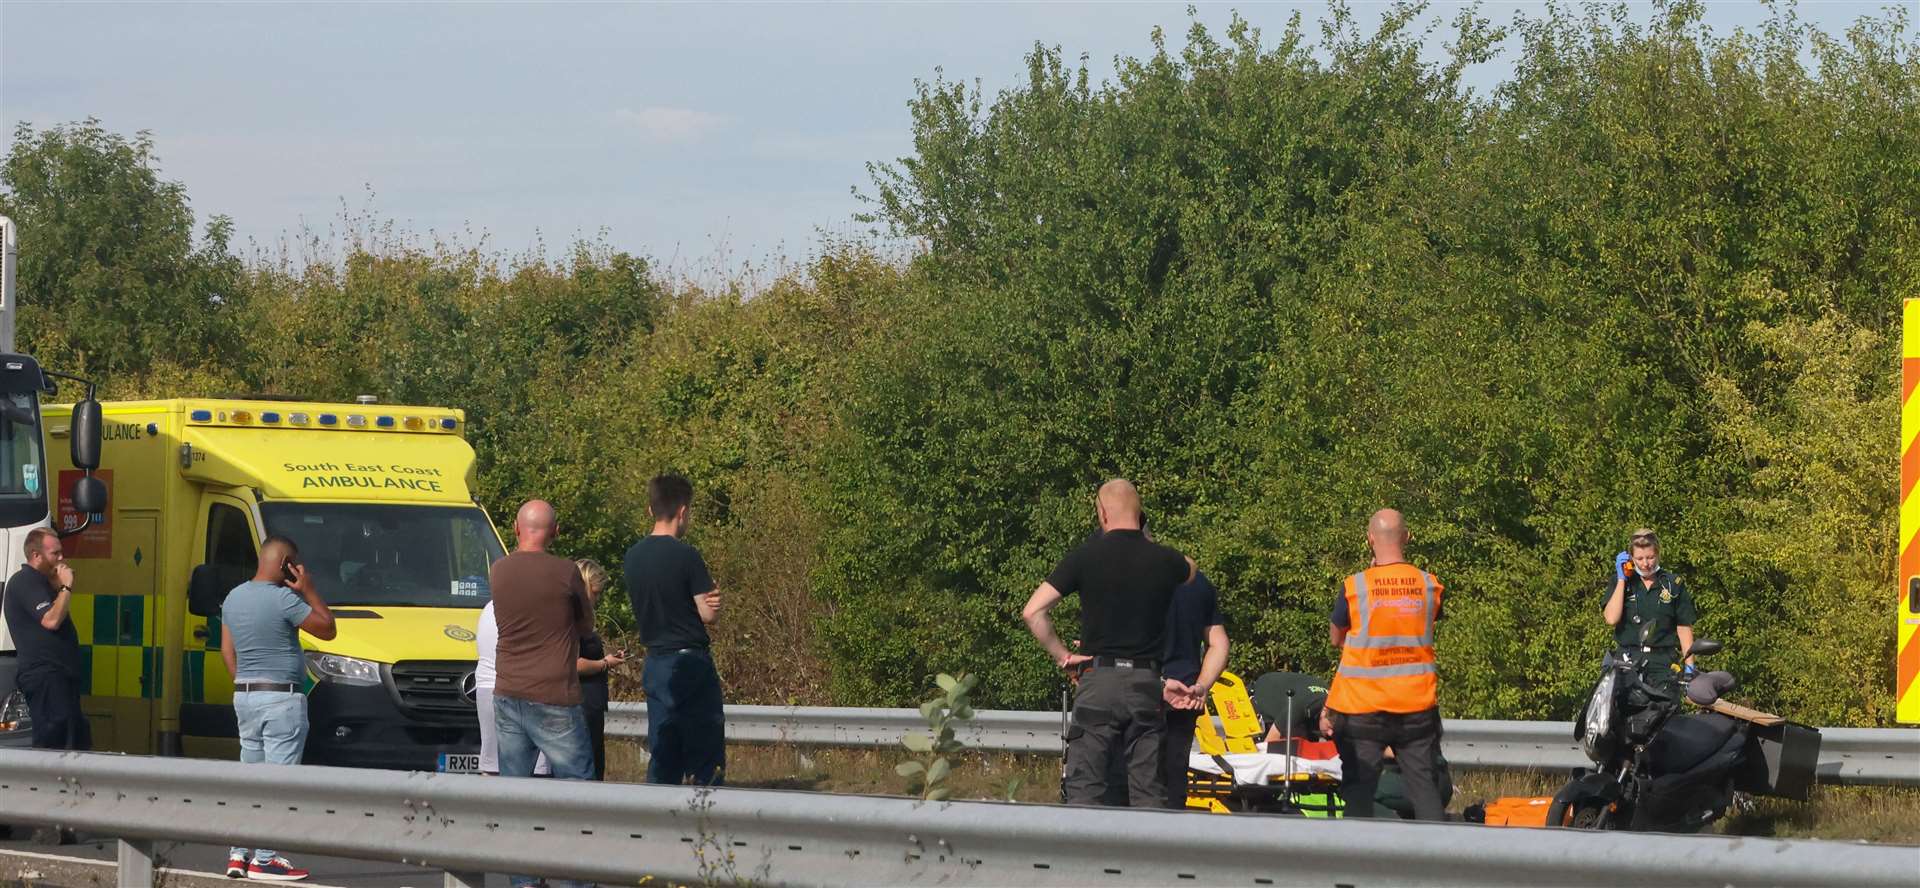 Emergency services at the scene after the crash on the A228 near East Peckham. Picture: UKNIP